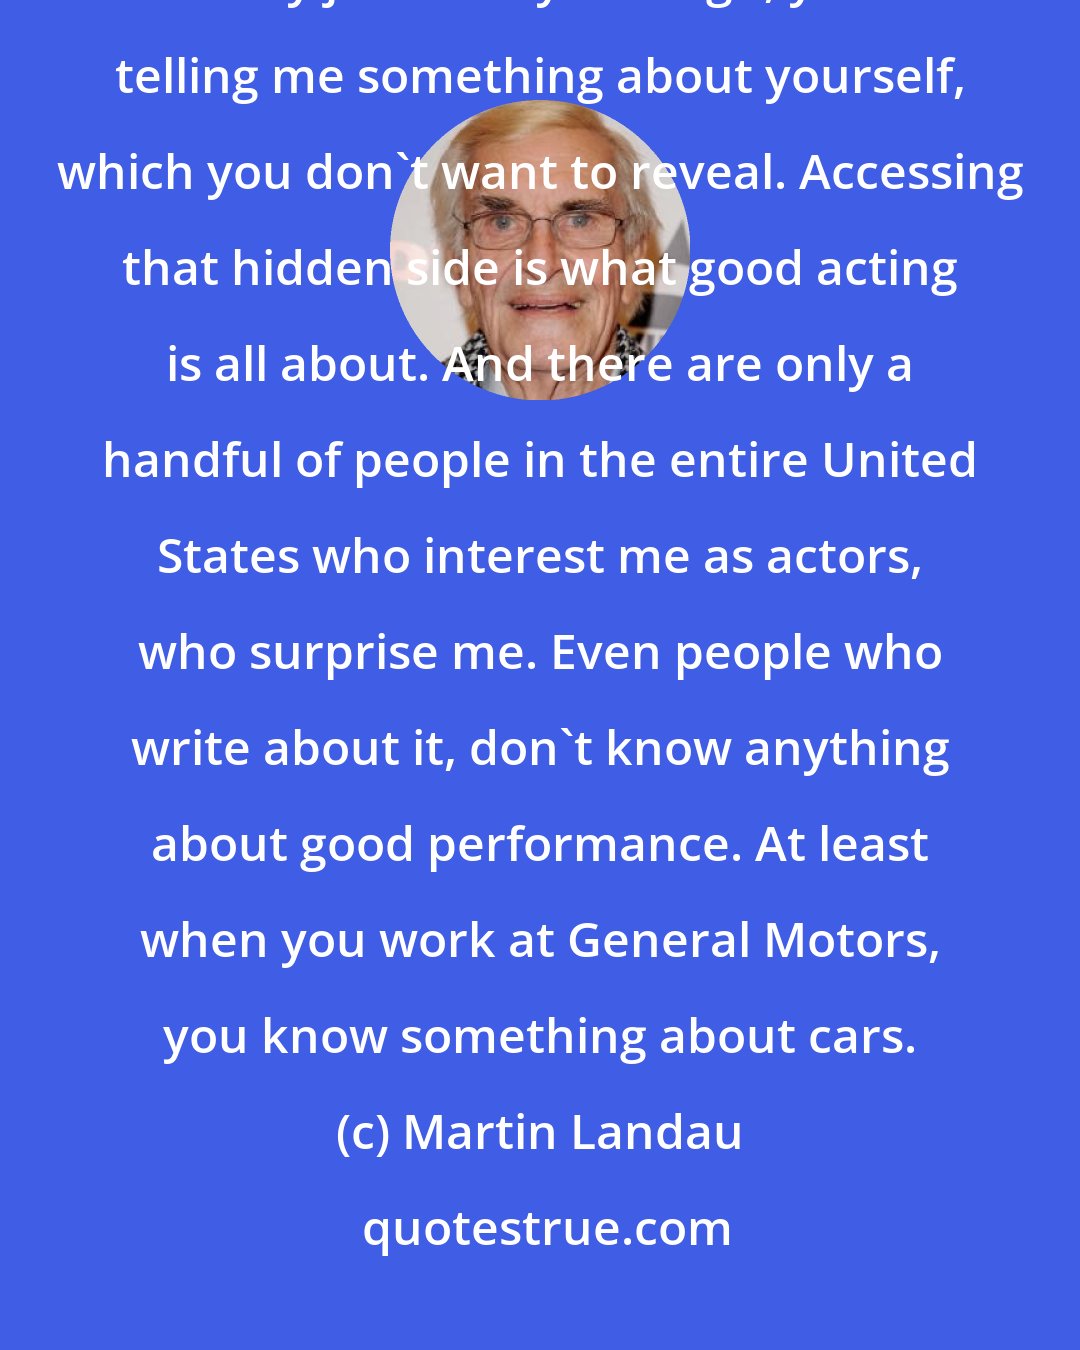 Martin Landau: People are in denial all the time, hiding things. If I tell you a racist or dirty joke and you laugh, you're telling me something about yourself, which you don't want to reveal. Accessing that hidden side is what good acting is all about. And there are only a handful of people in the entire United States who interest me as actors, who surprise me. Even people who write about it, don't know anything about good performance. At least when you work at General Motors, you know something about cars.